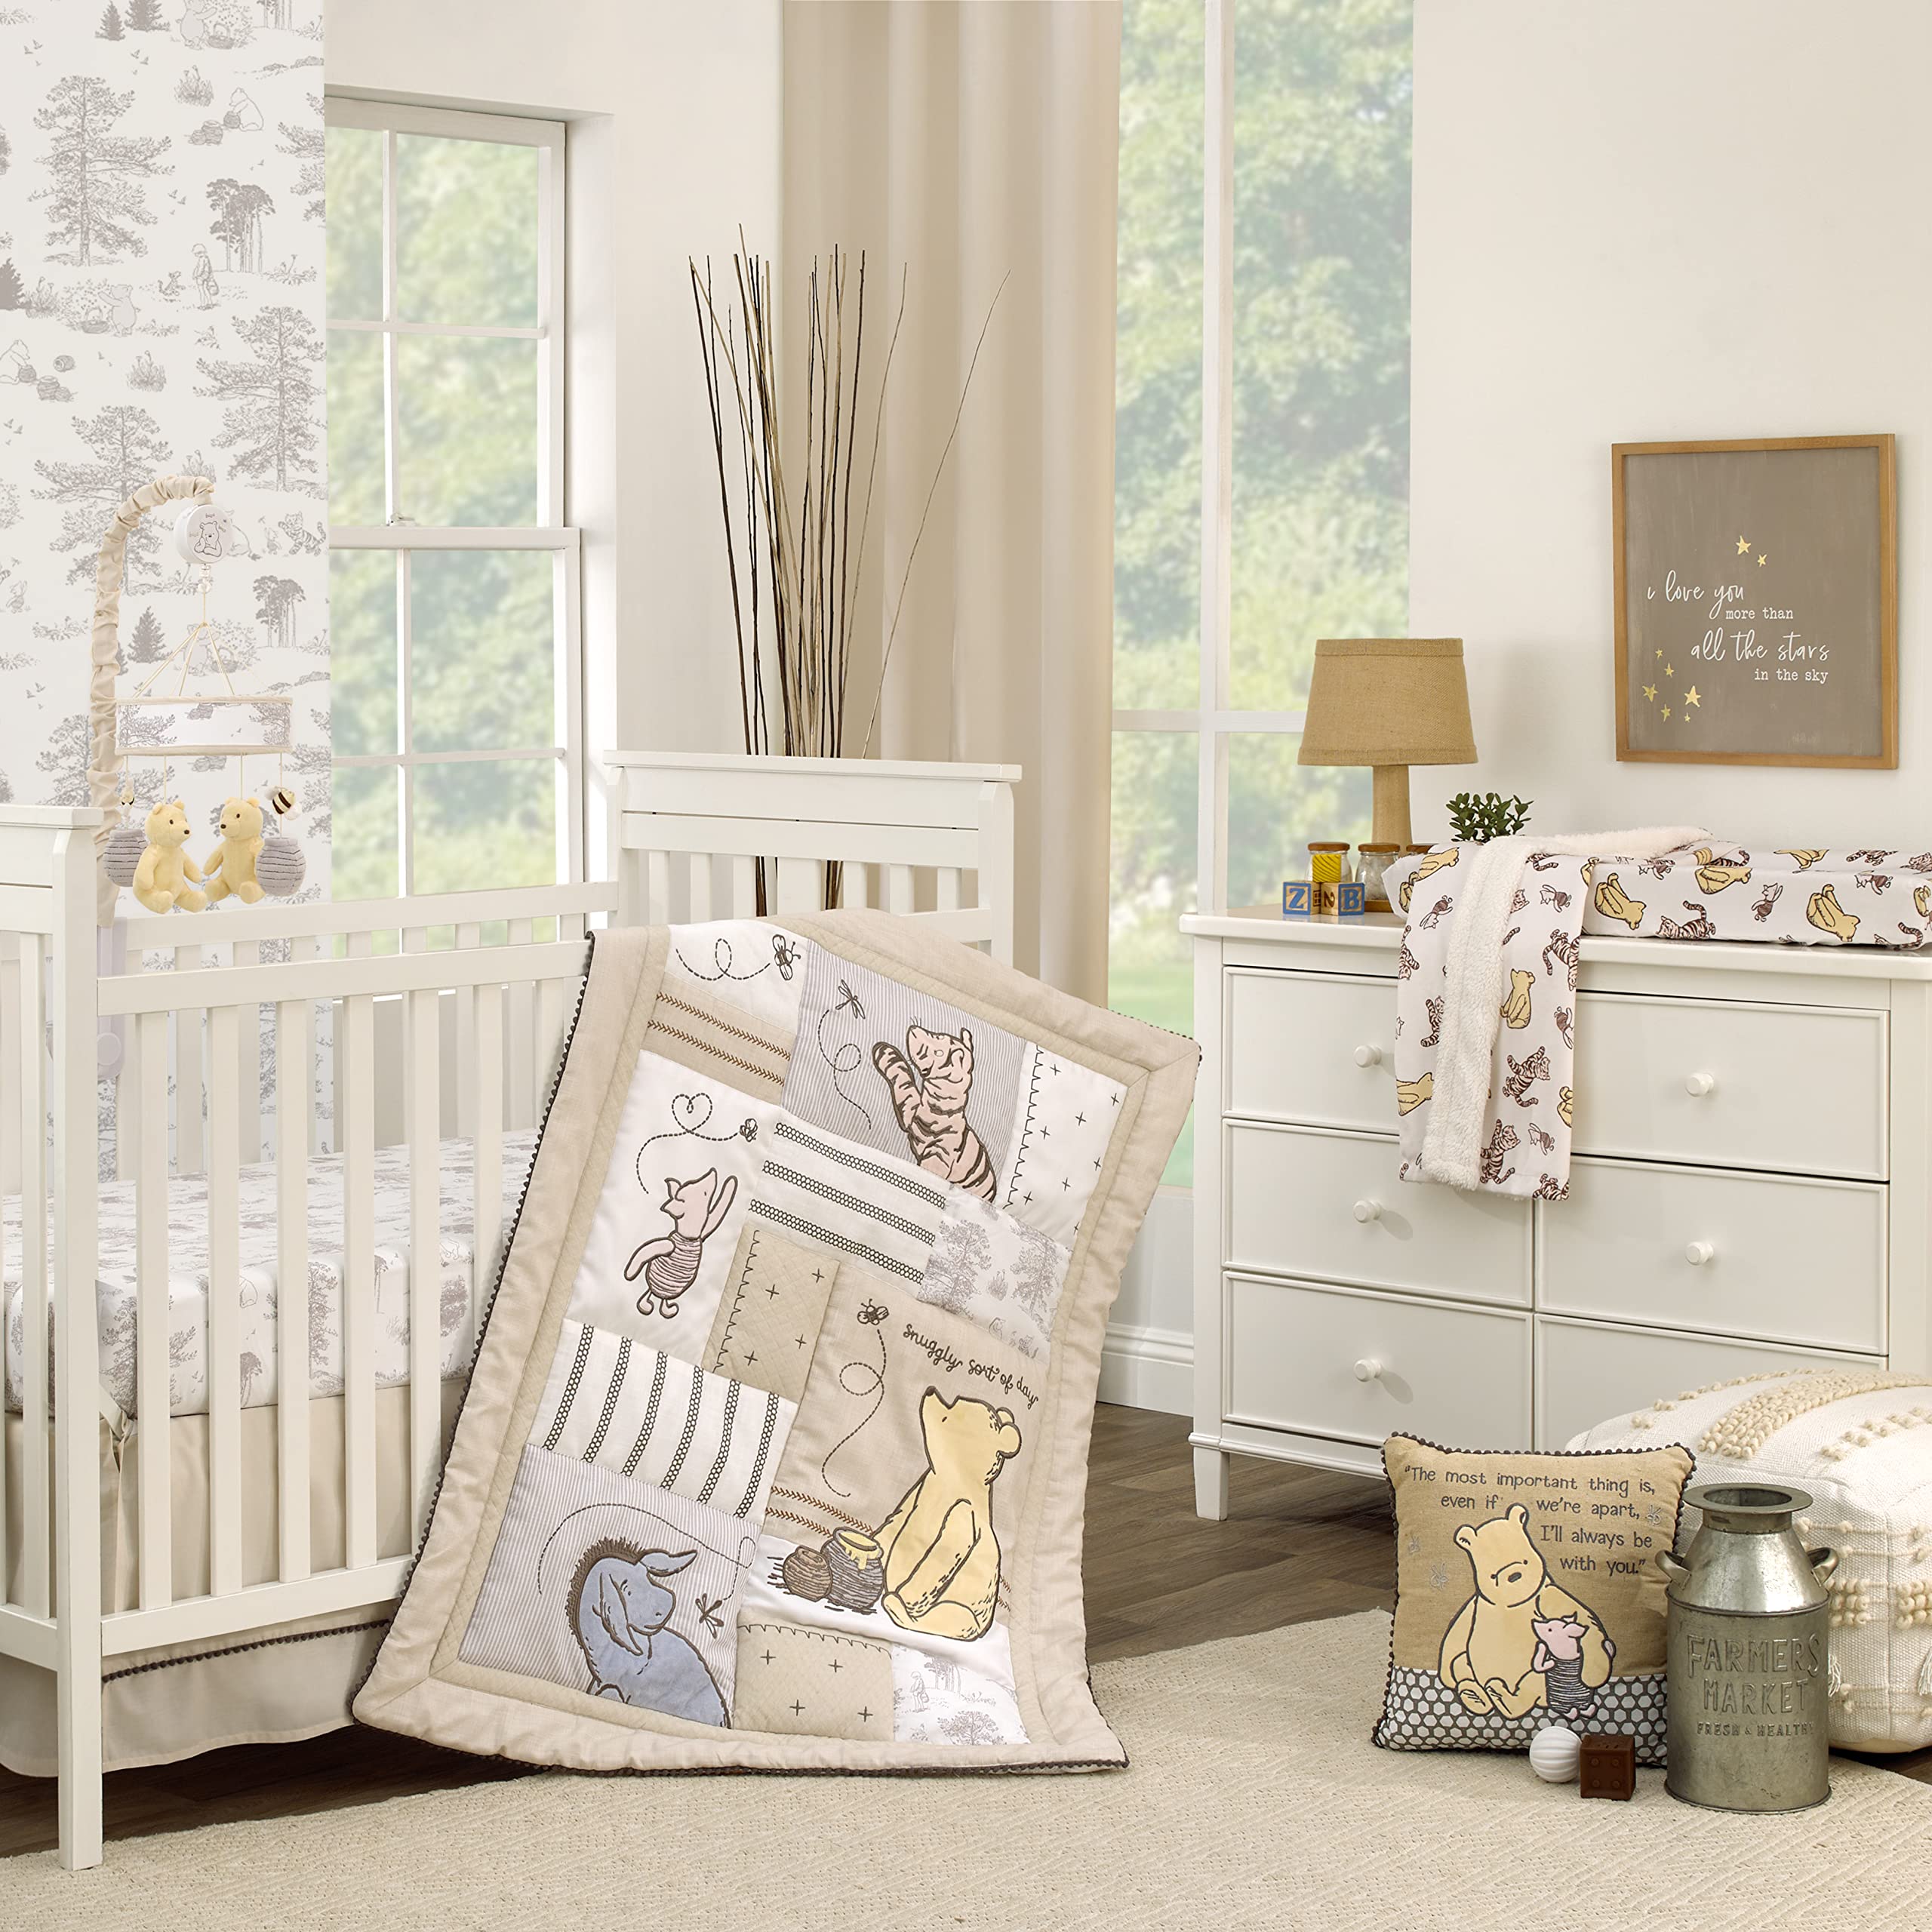 Disney classic pooh hunny fun with piglet and eeyore the hundred acre woods taupe piece nursery crib bedding set